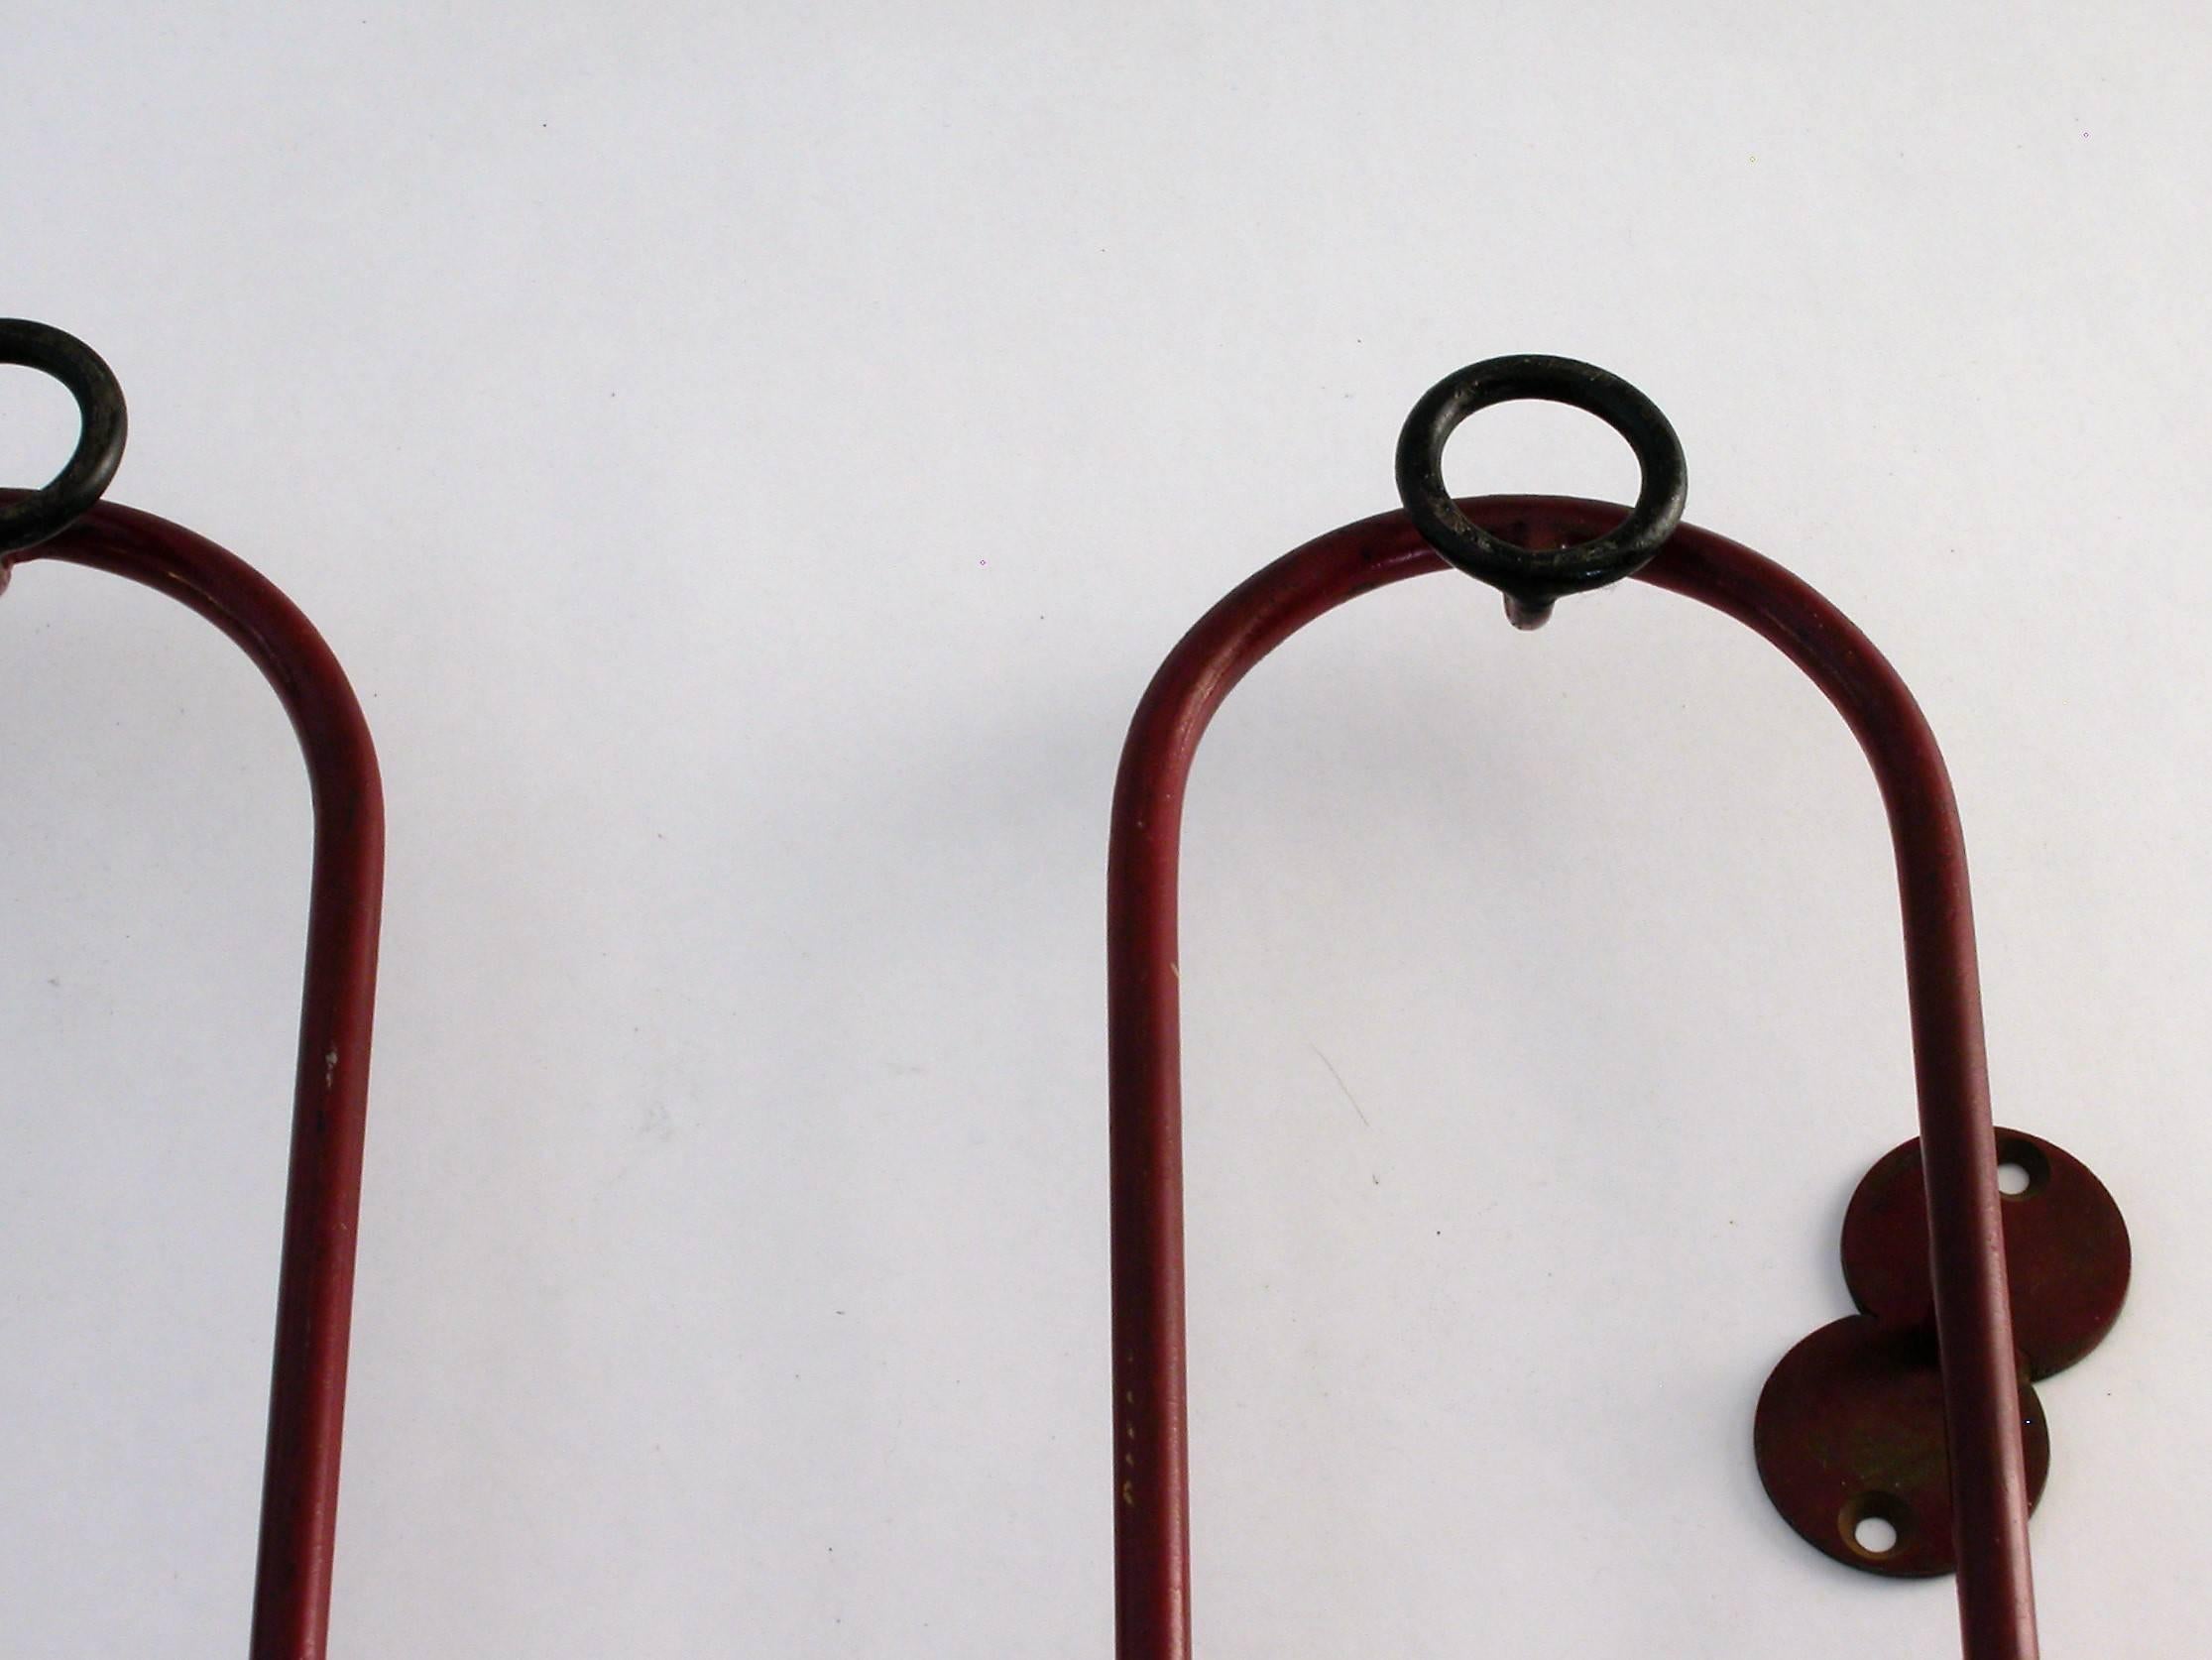 Coat rack attributed to Jean Royère (France 1921-1981), circa 1950.
Painted red and black wrought iron.
 
A variant of this model has been sold at Christie's New York on June 10, 2015 and another variant, a corner coat rack,
at Sotheby's New